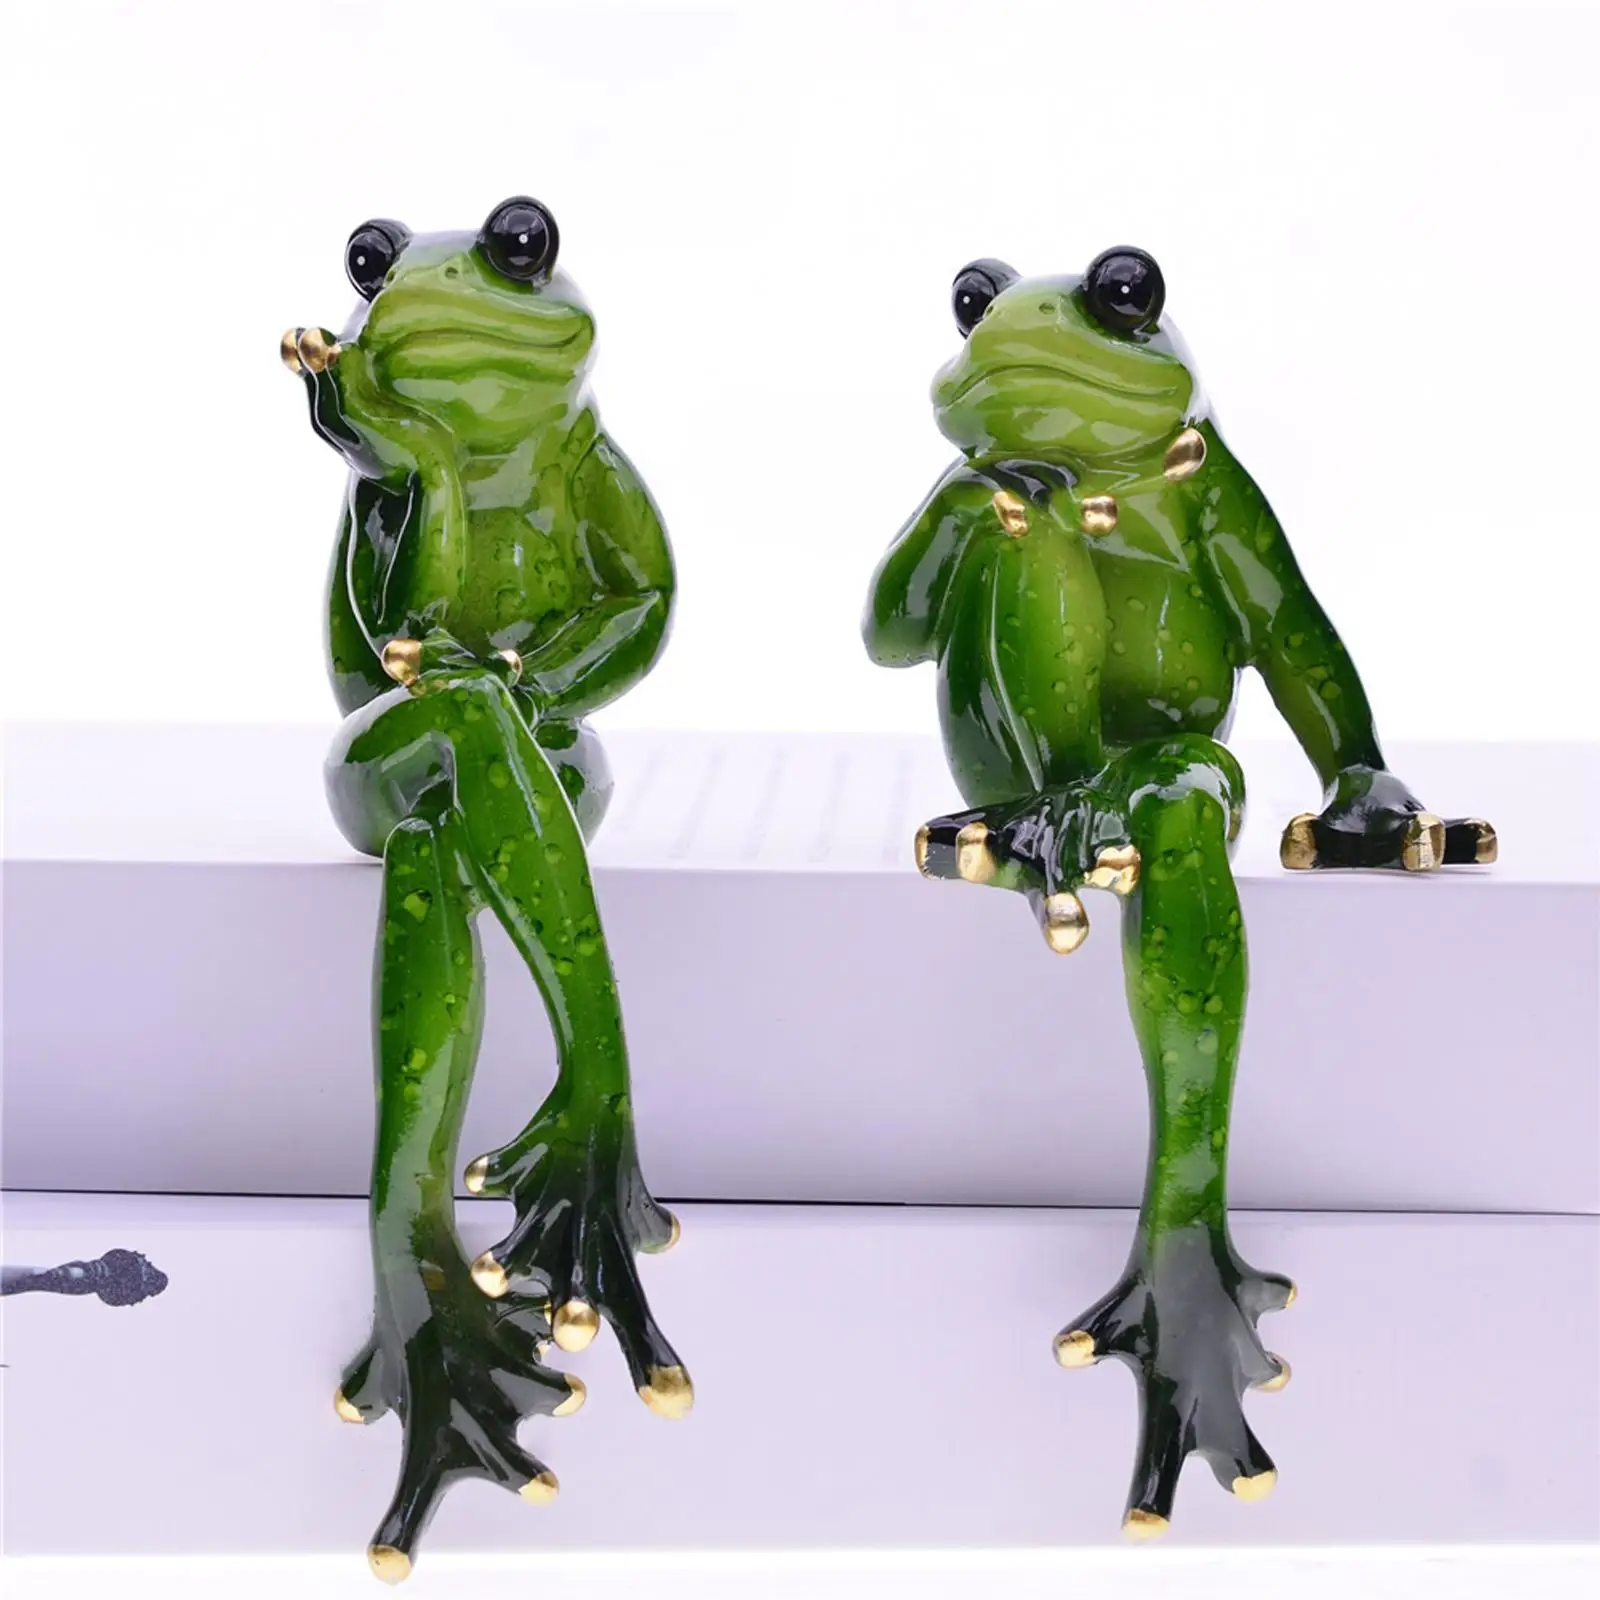 2 Pieces Decorative Frog Figurine Animal Sculpture for Decoration Gift